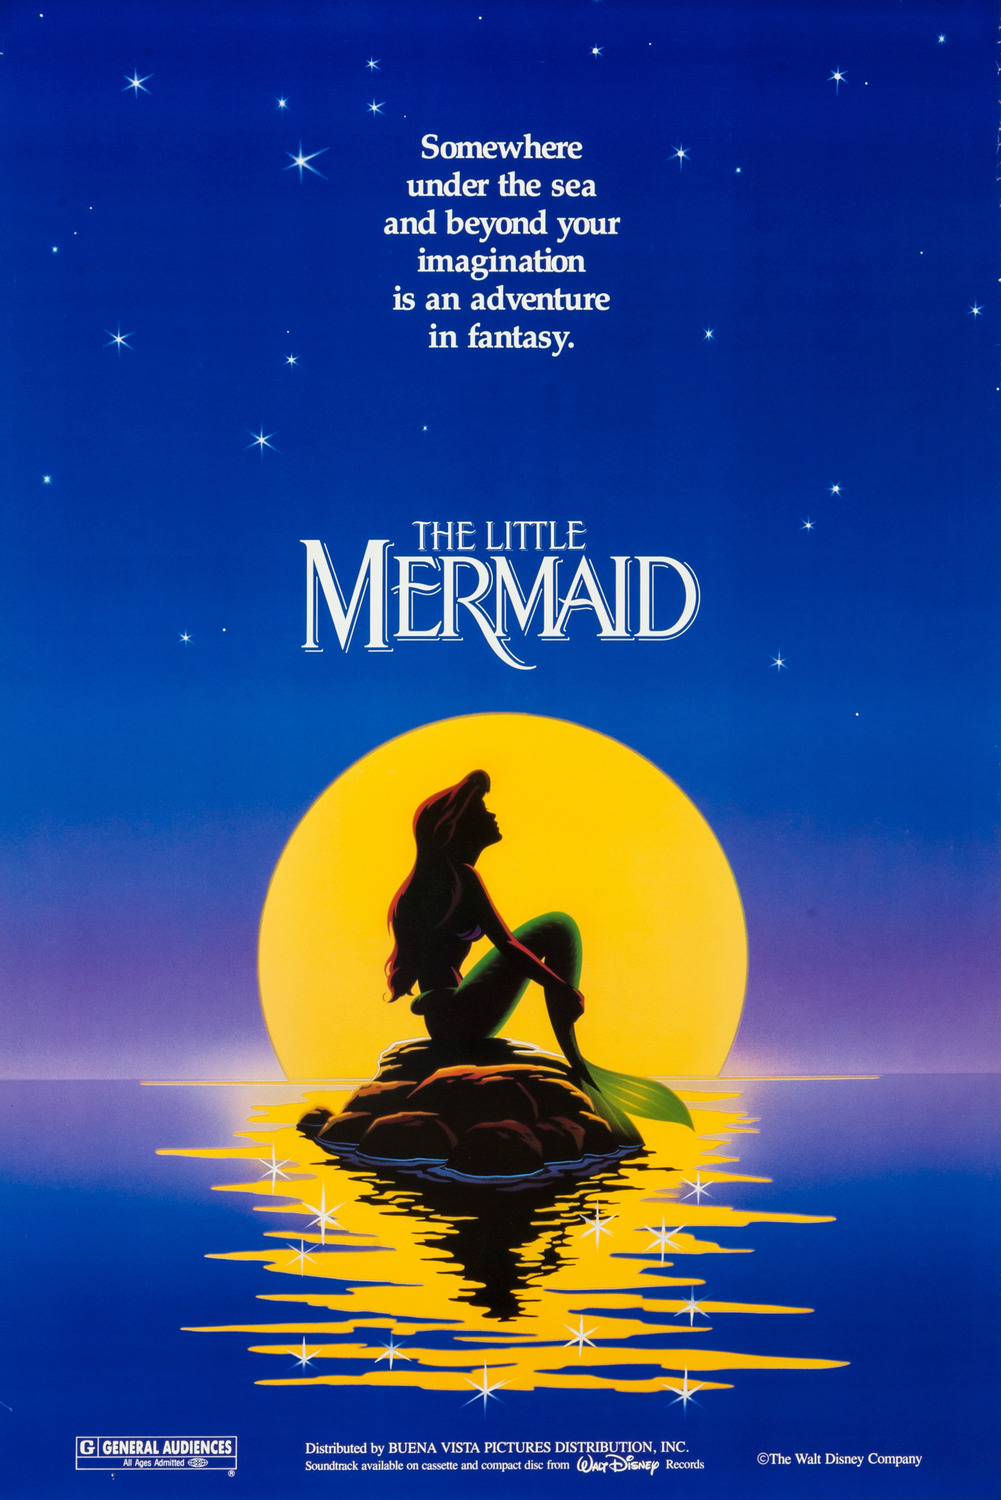 april steinhoff recommends the mermaid movie download pic